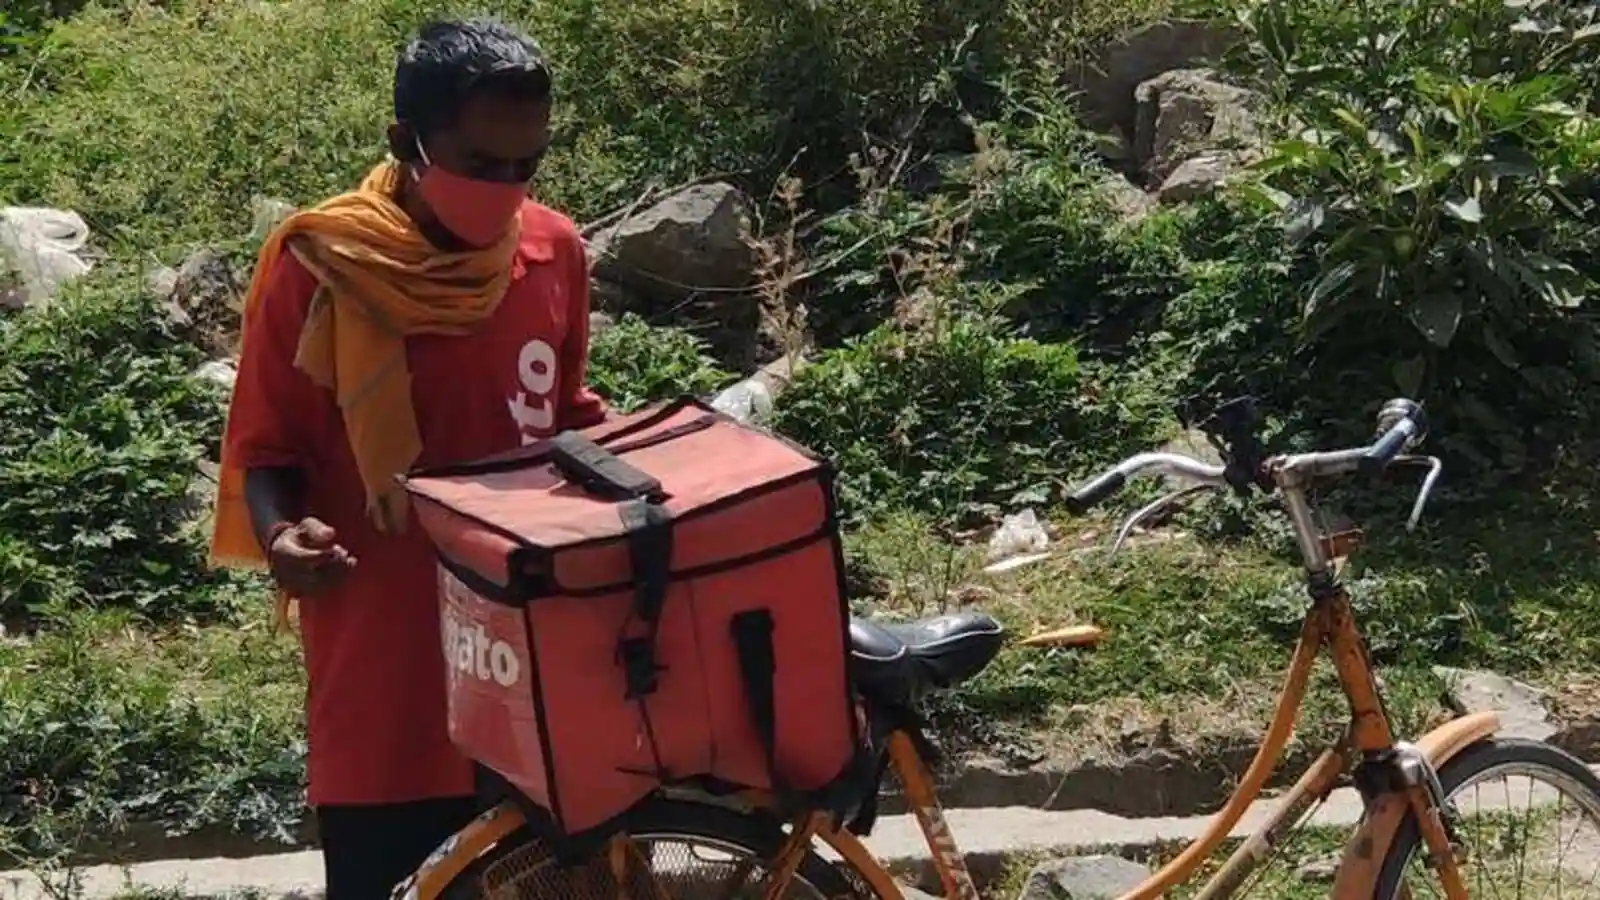 Food delivery man gets a bike after customer posts his story online